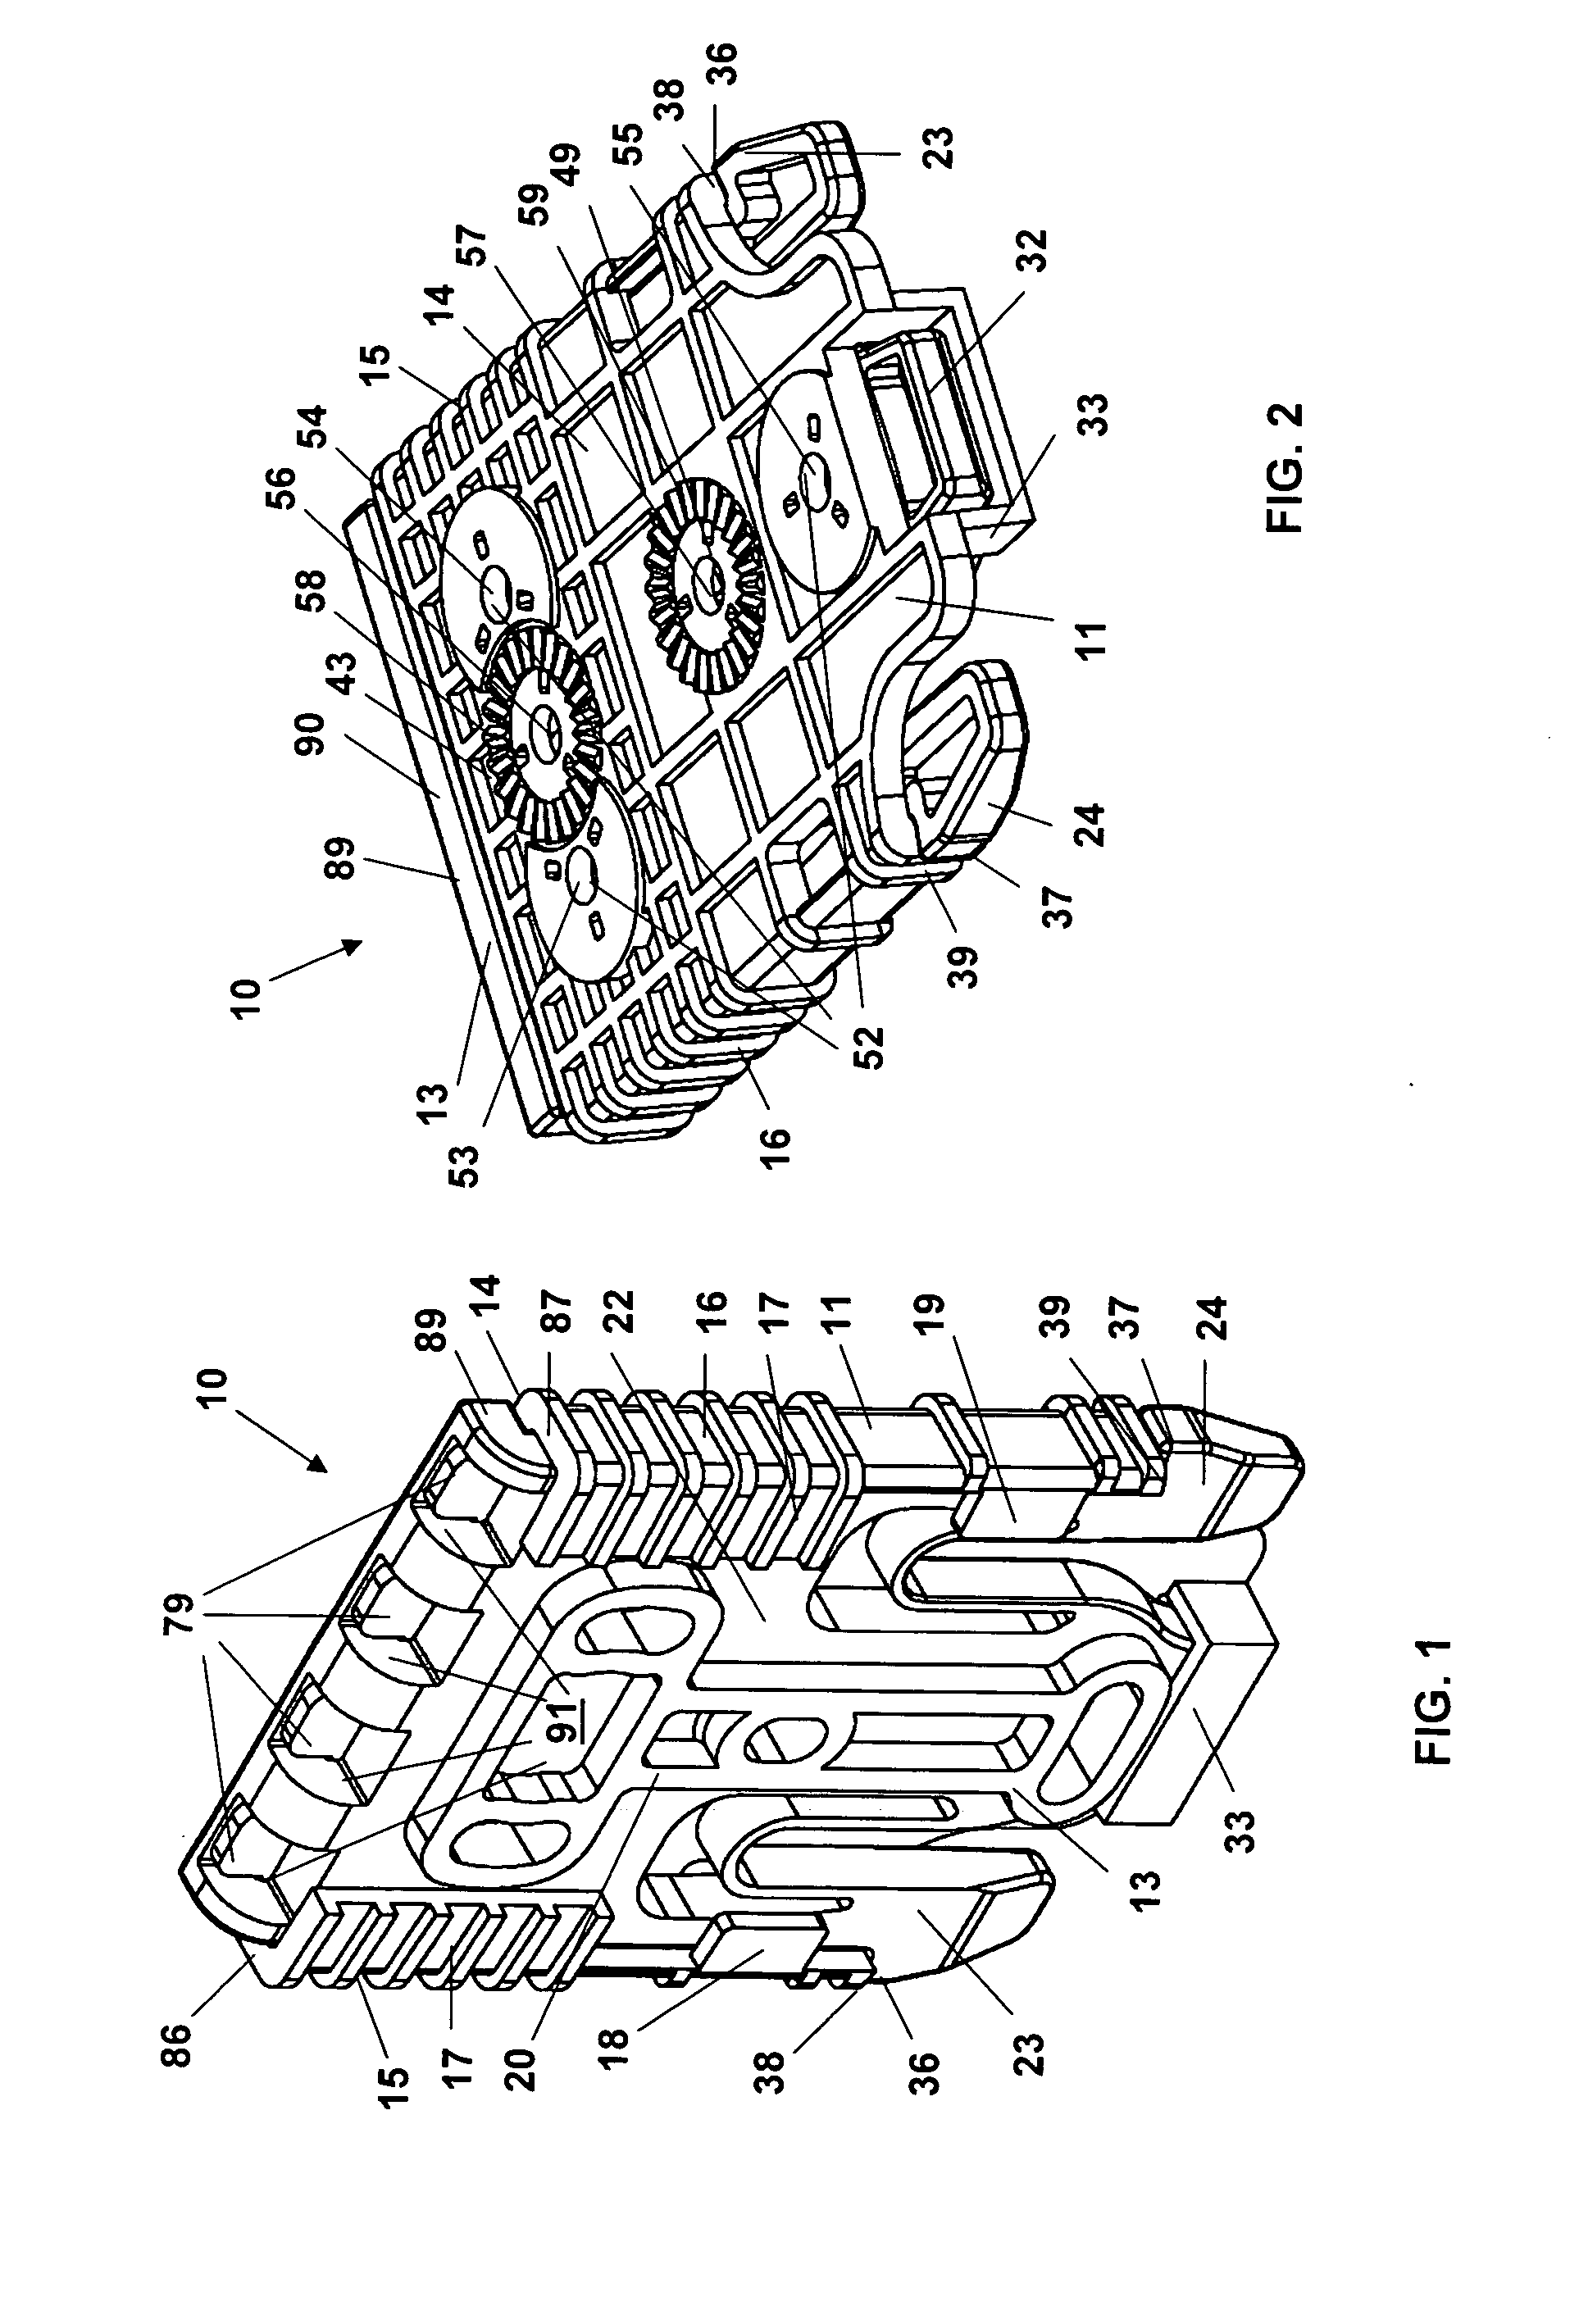 Attachment mount and receiver system for removably attaching articles to garments